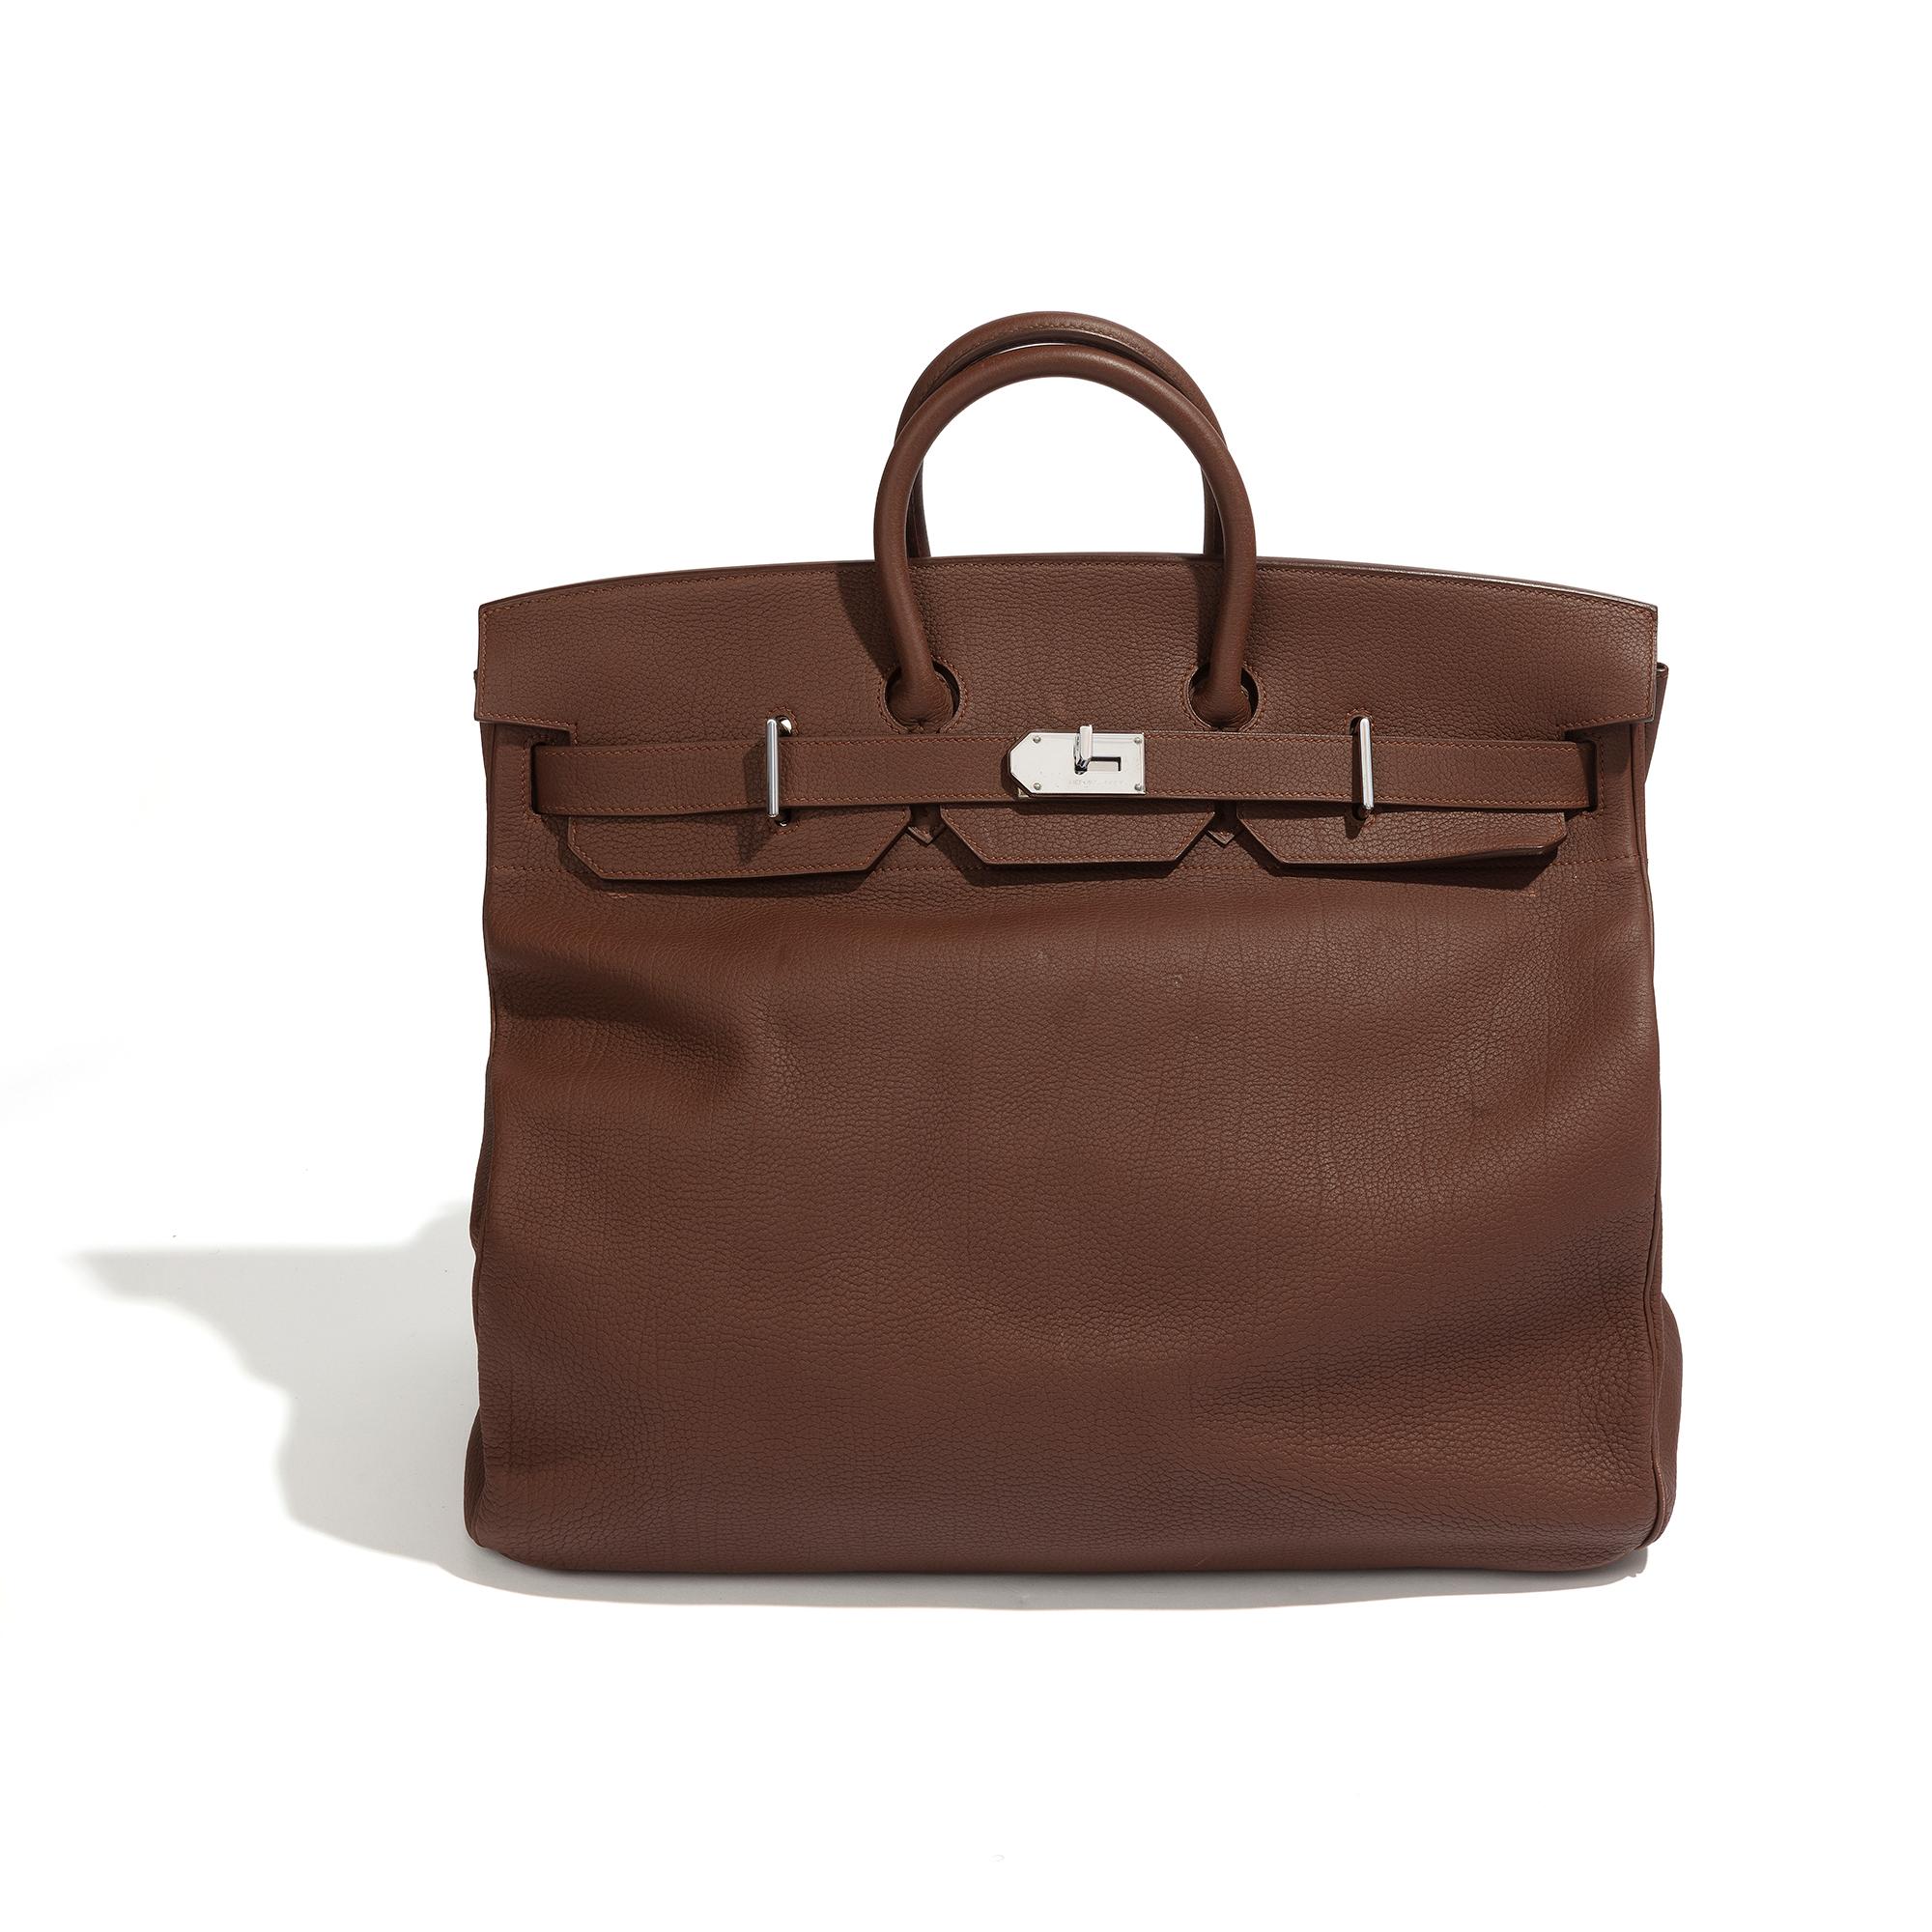 The Hermès HAC is a classic handbag that has gained worldwide recognition. The design of this bag was originally intended to carry riding equipment. The process of creating these bags is quite complex, and it takes three to four years of rigorous